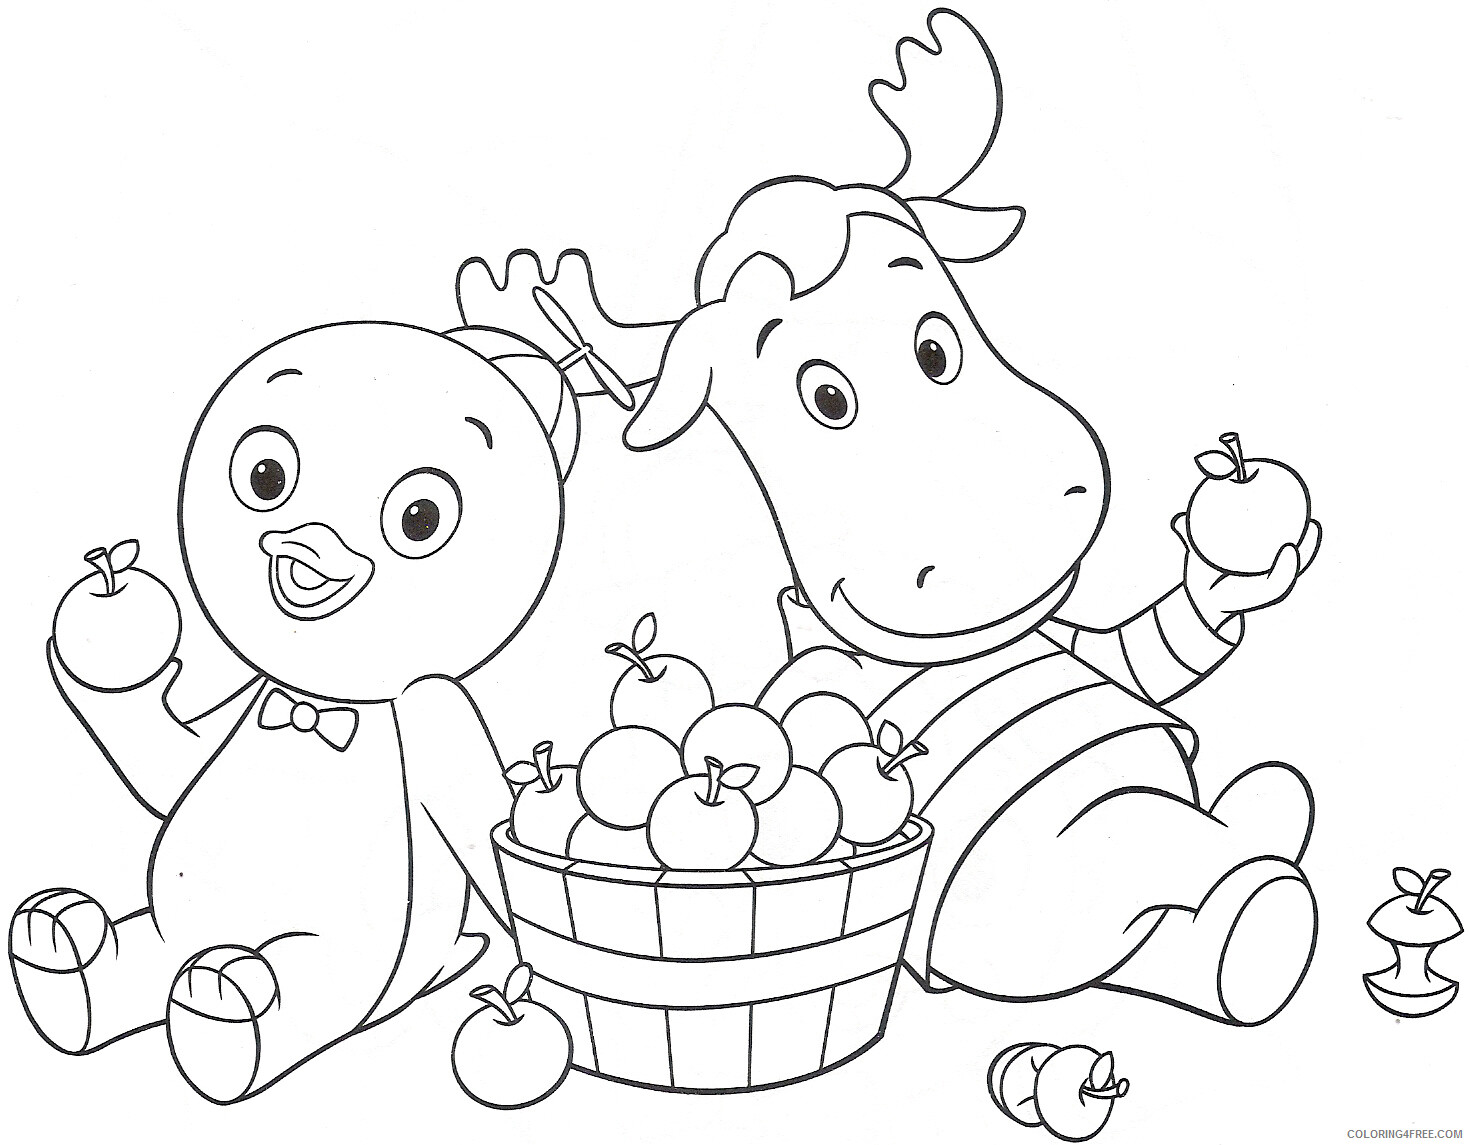 Backyardigans Coloring Pages TV Film Backyardigans For Kids Printable 2020 00524 Coloring4free